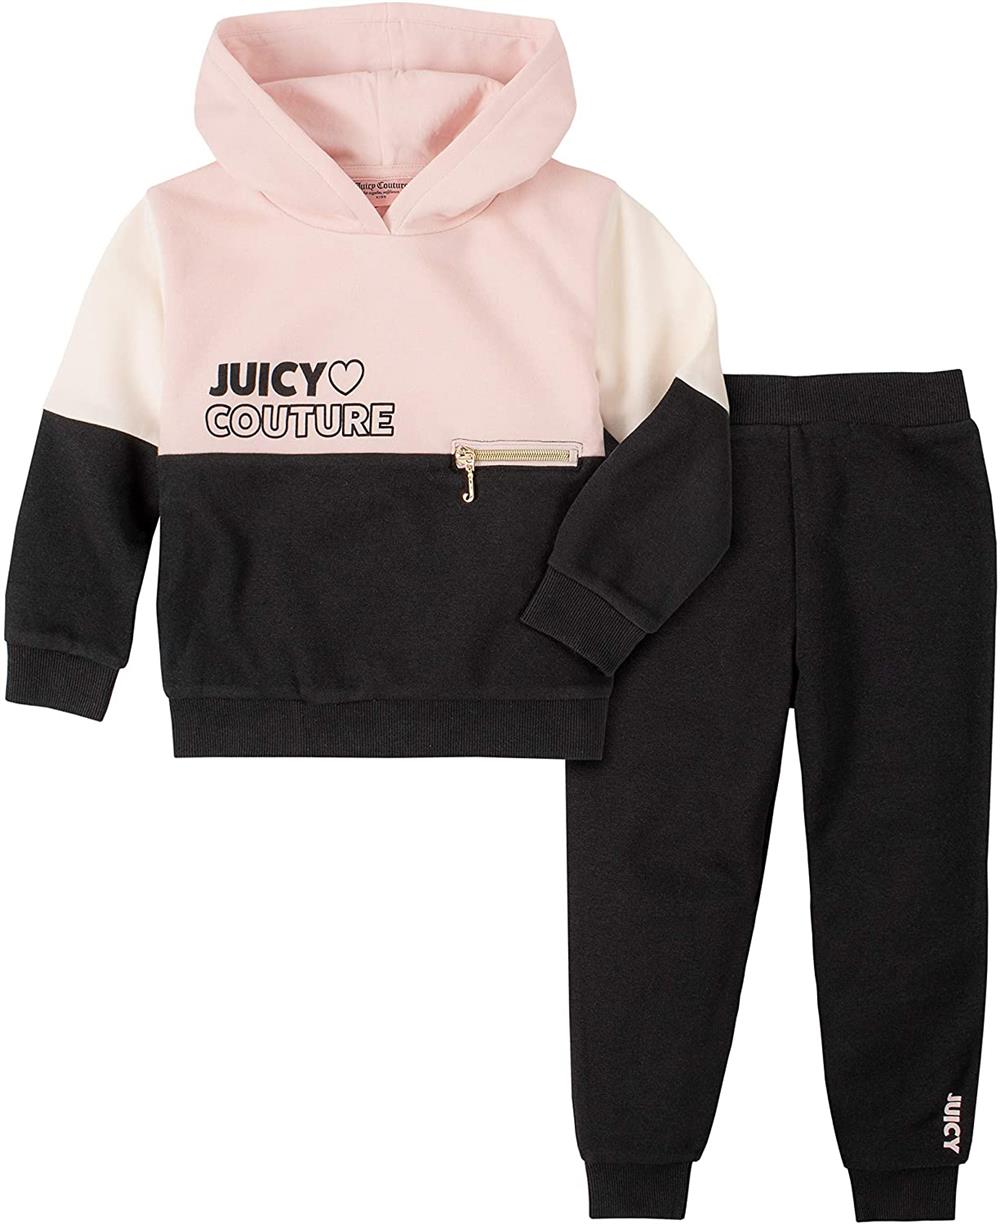 Juicy Couture Girls 12-24 Months Colorblock Hooded Jogger Set